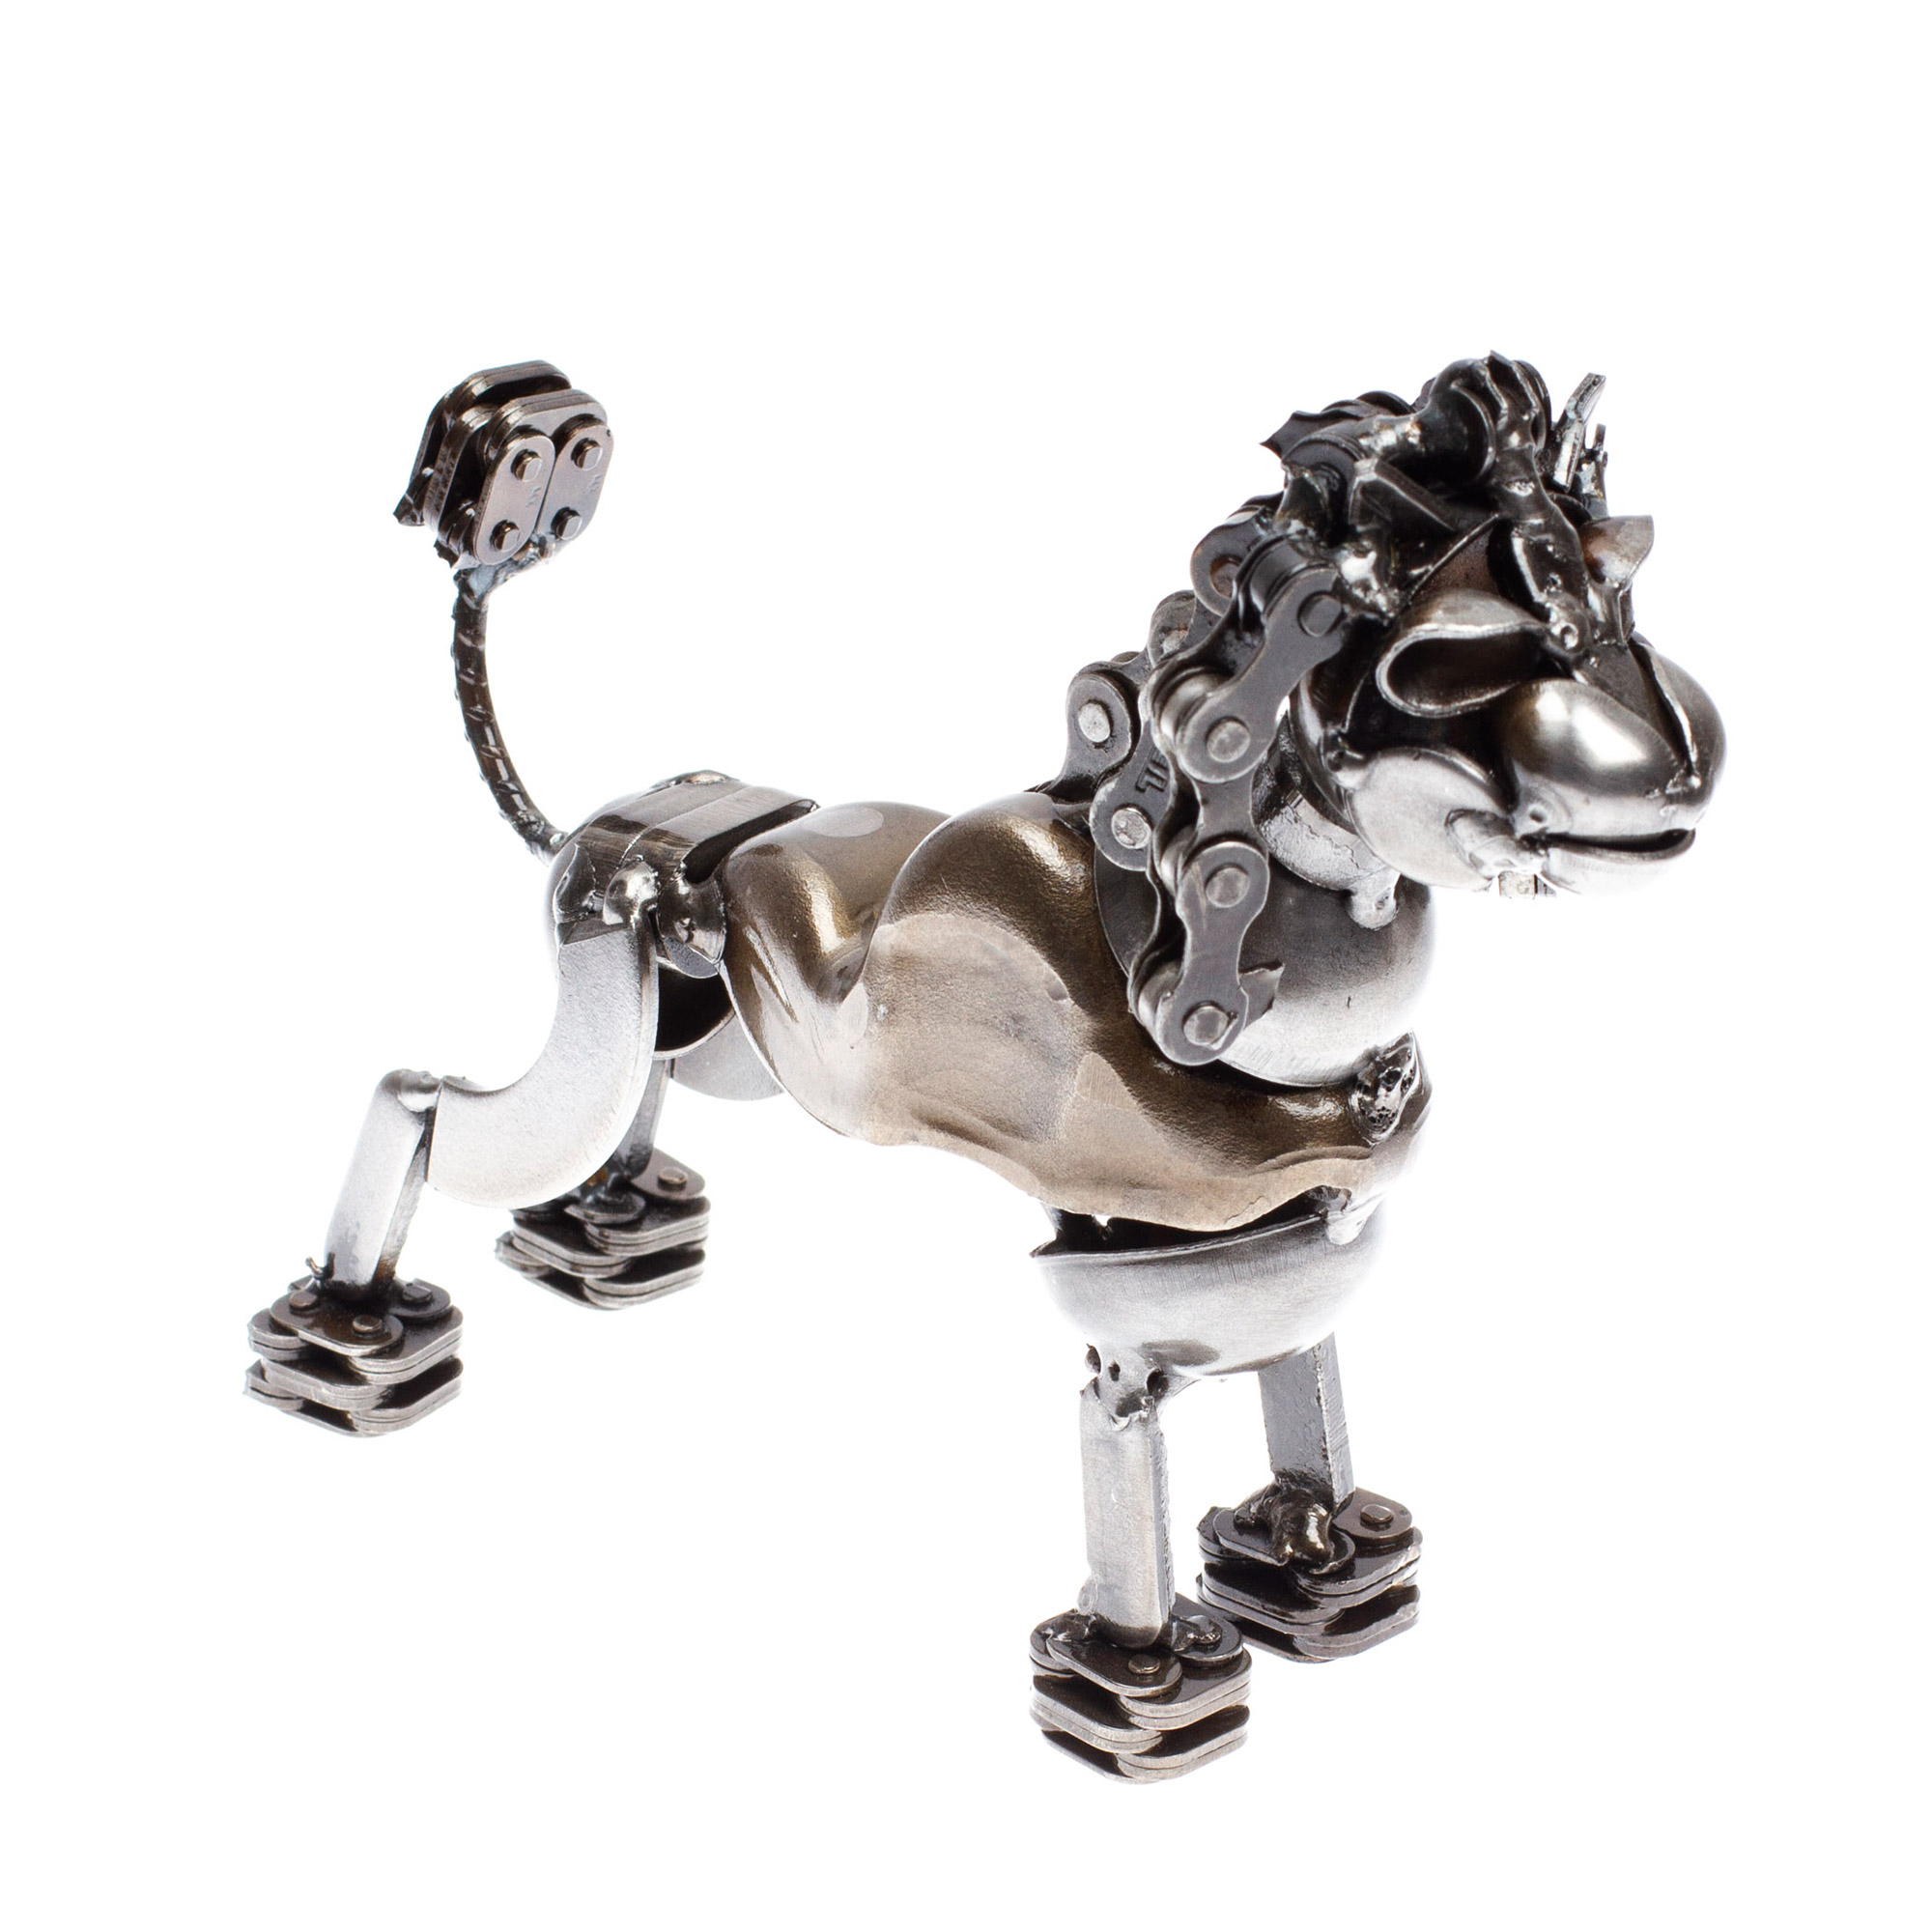 UNICEF Market | Eco Friendly Recycled Metal Poodle Sculpture - Rustic Poodle